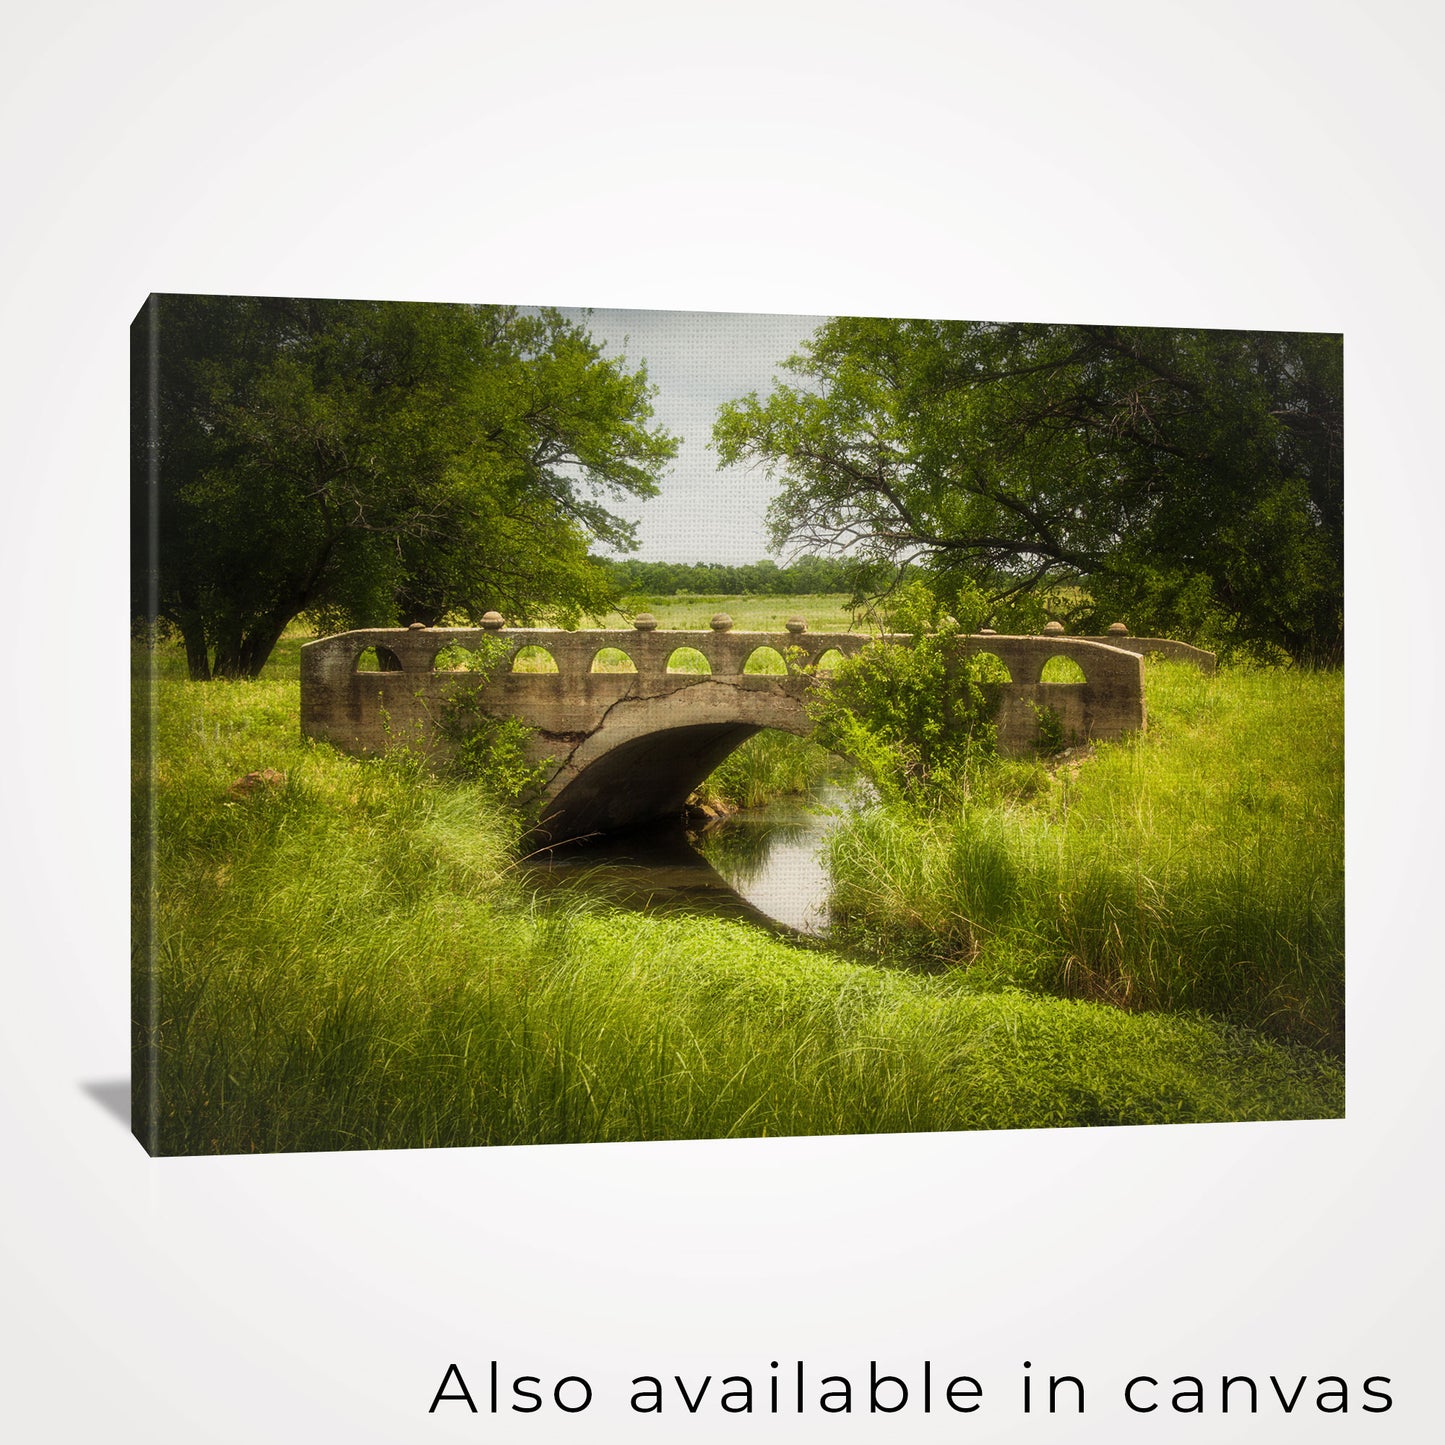 The photograph is beautifully presented on a gallery-wrapped canvas, showing this bridge photograph is also available as a canvas print for those interested in a ready-to-hang solution.